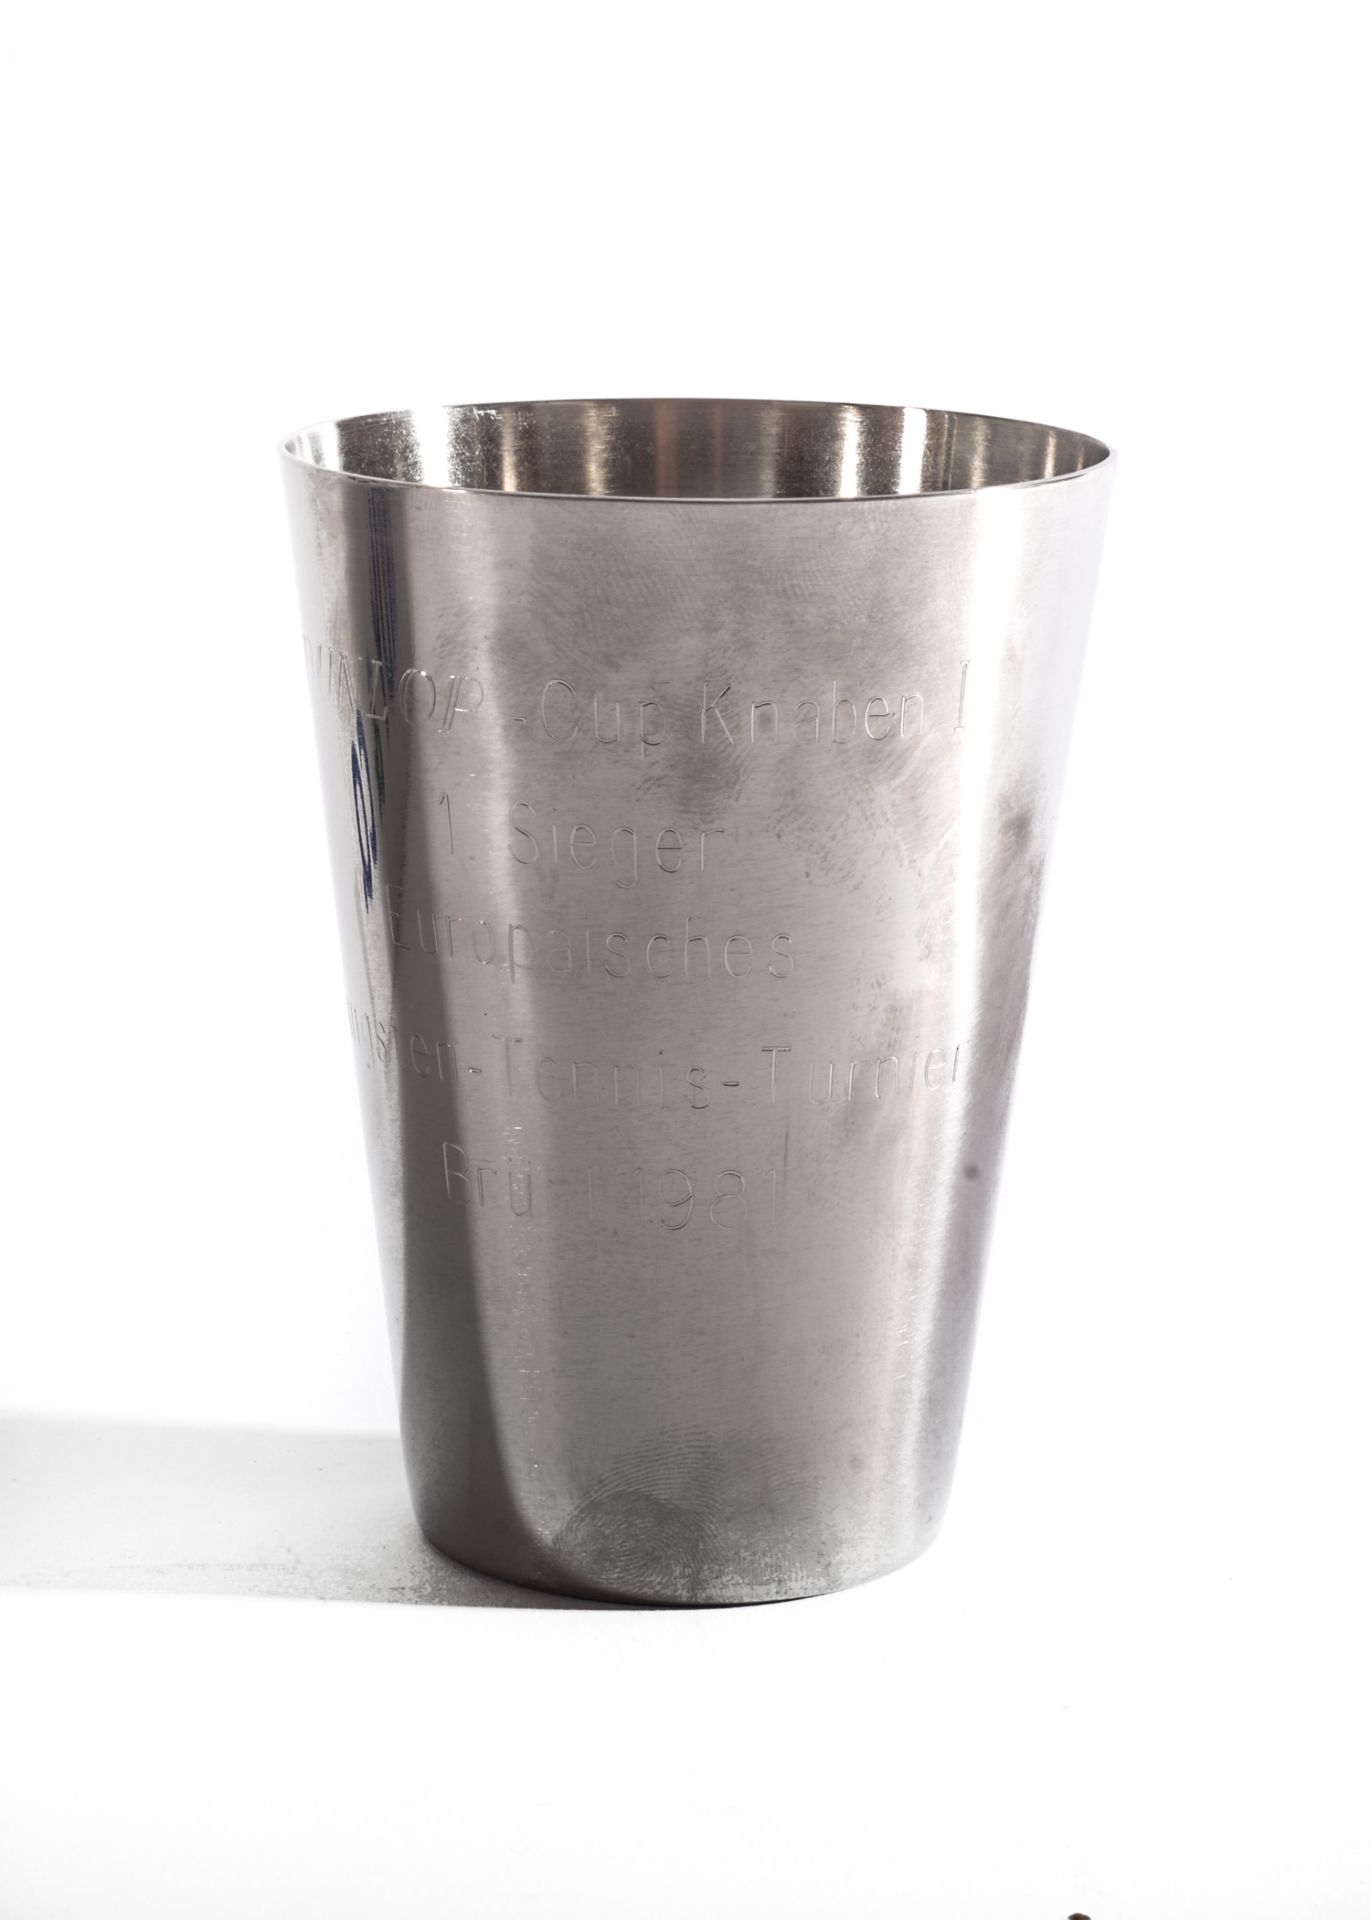 A Metal Tumbler 115mm tall bearing the inscribed words Dunlop Cup Knaben I 1. Seiger Europaisches - Image 2 of 3